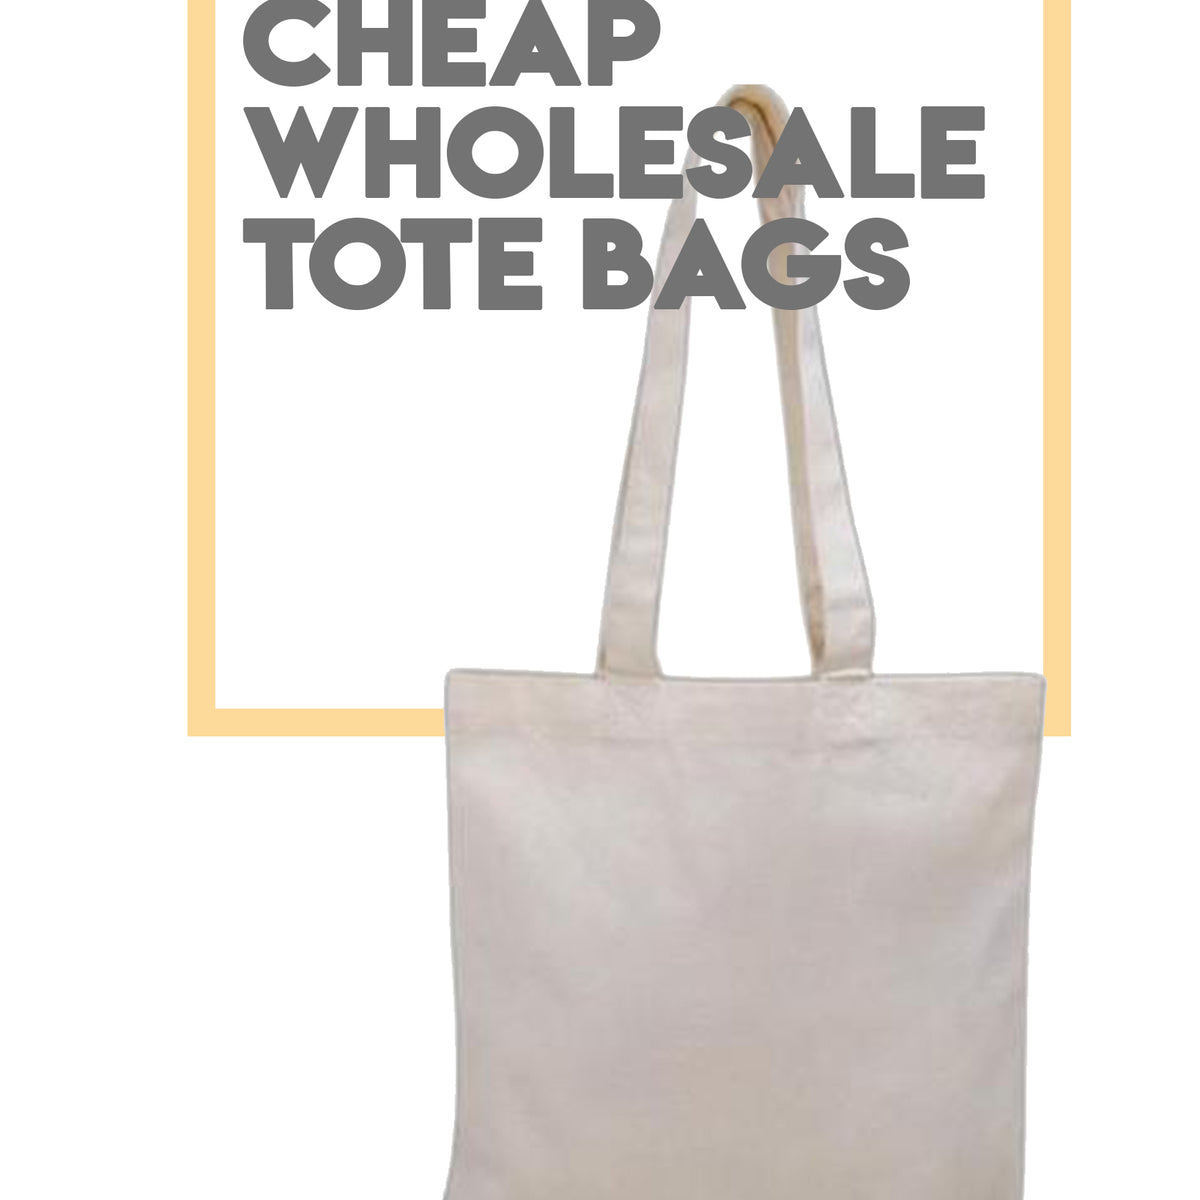 Cheap Wholesale Tote Bags, Canvas tote bags, Promotional tote bags